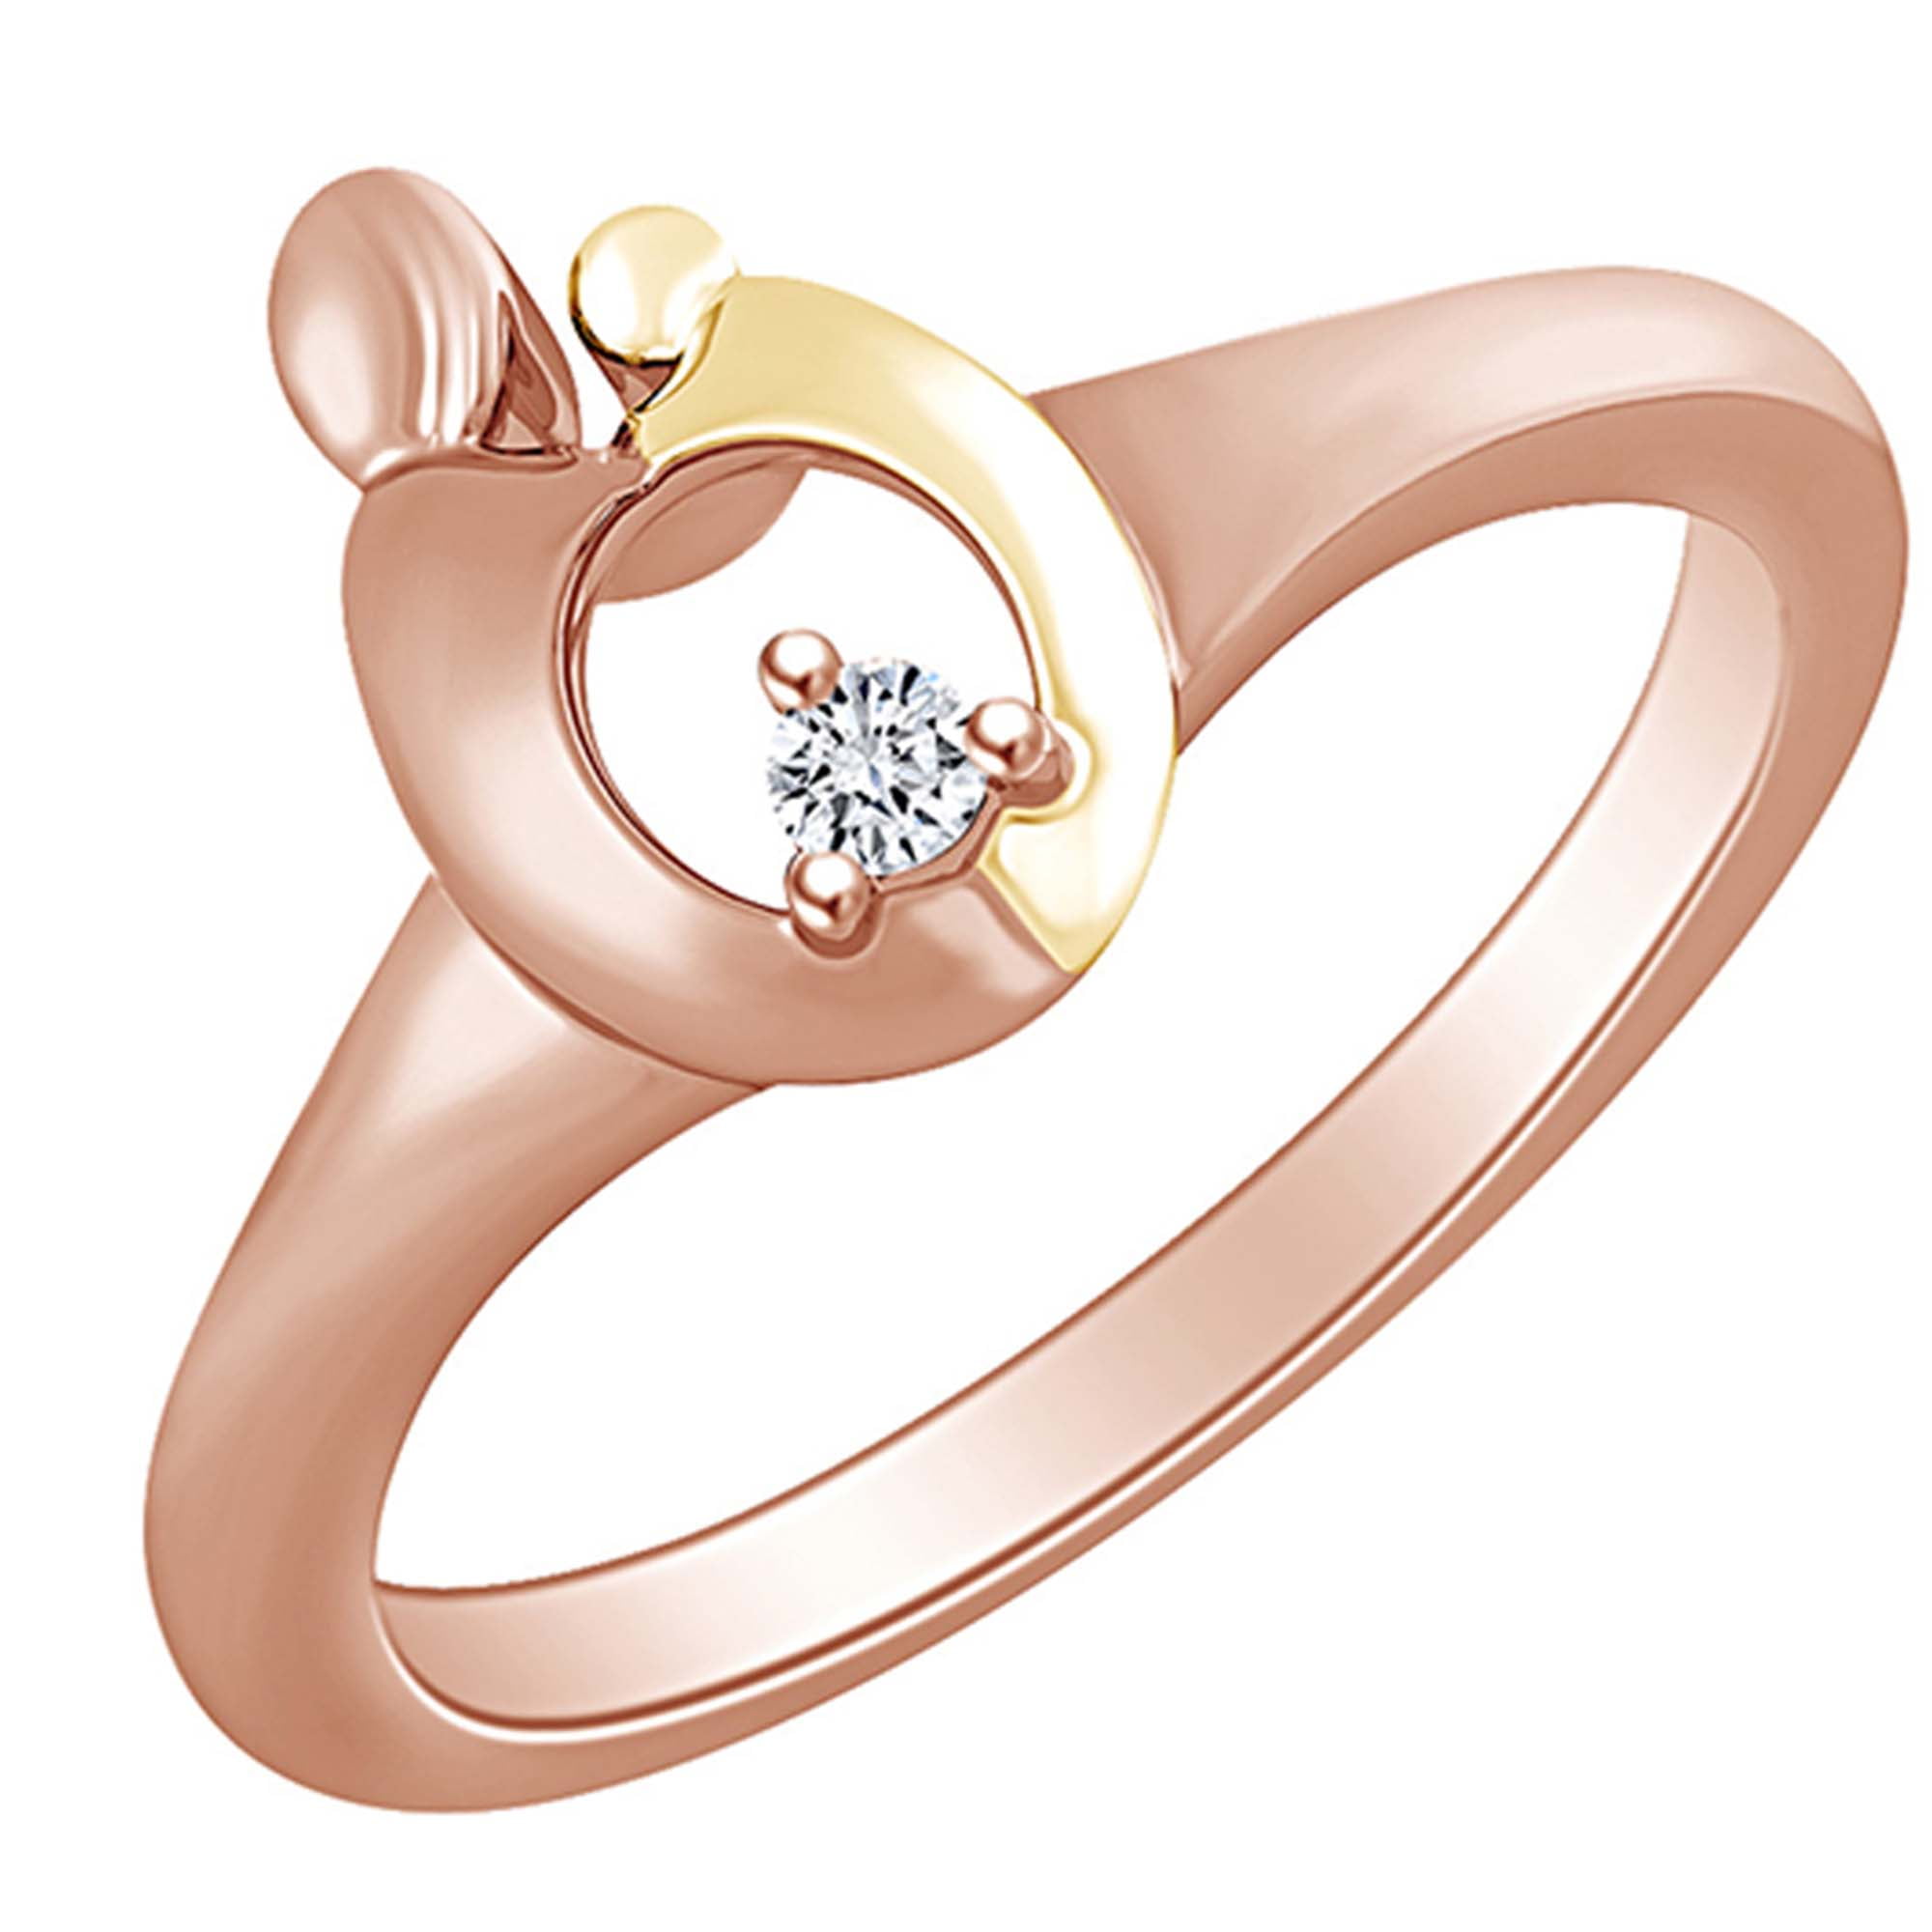 Details about   Natural 0.2carat Round Cut Diamond Ladies Heart Infinity Earrings 14K Gold